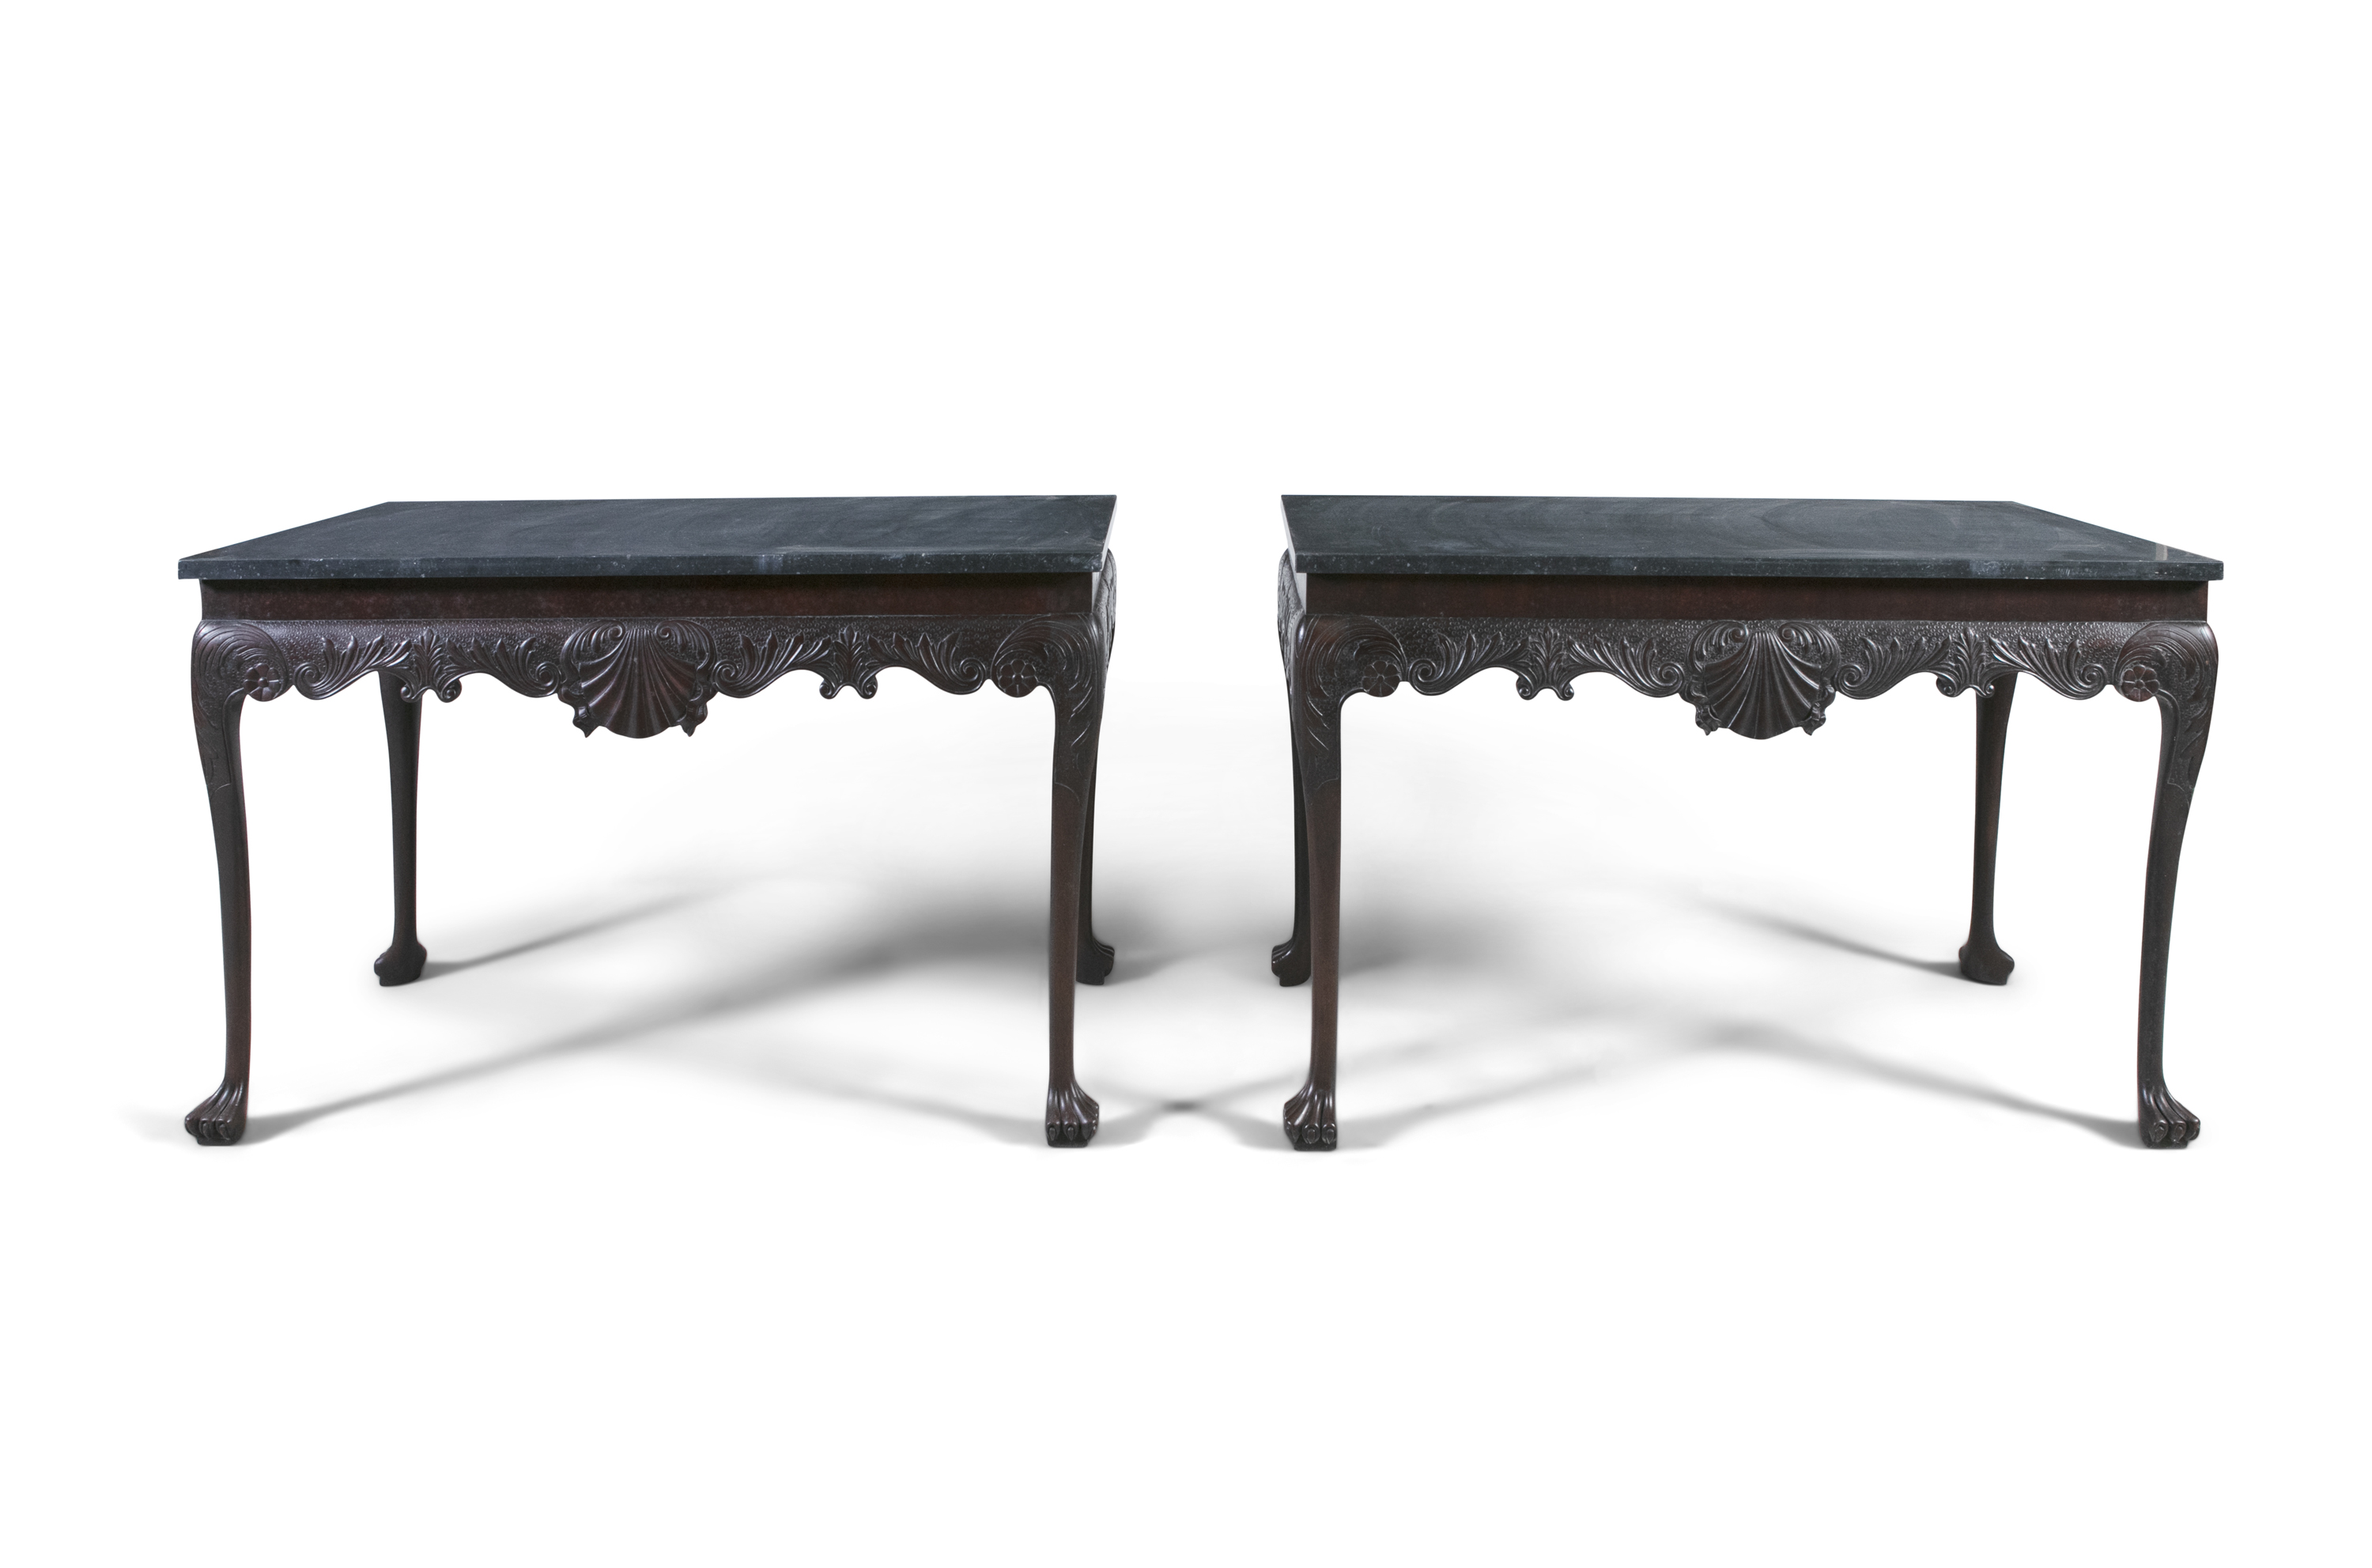 A PAIR OF IRISH GEORGE III STYLE MAHOGANY SIDE TABLES, carved by David Lennon, 20th century, the